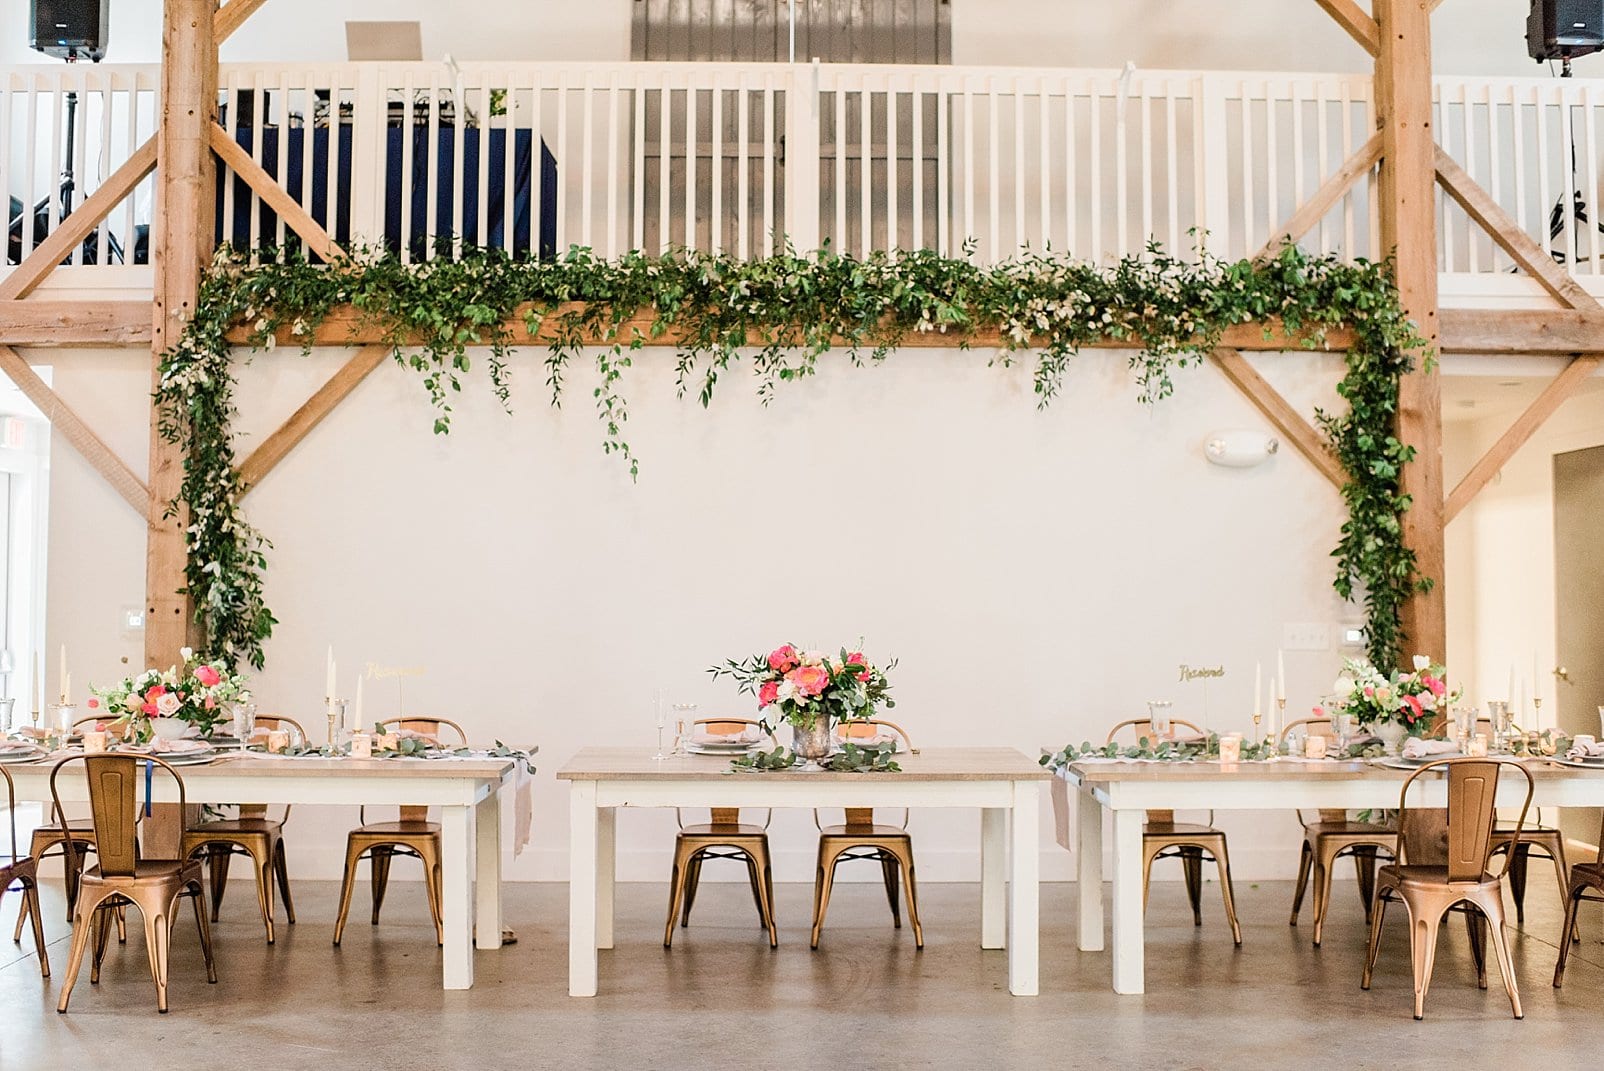 barn at chapel hill wedding reception head table with floral centerpiece and draped greenery photo